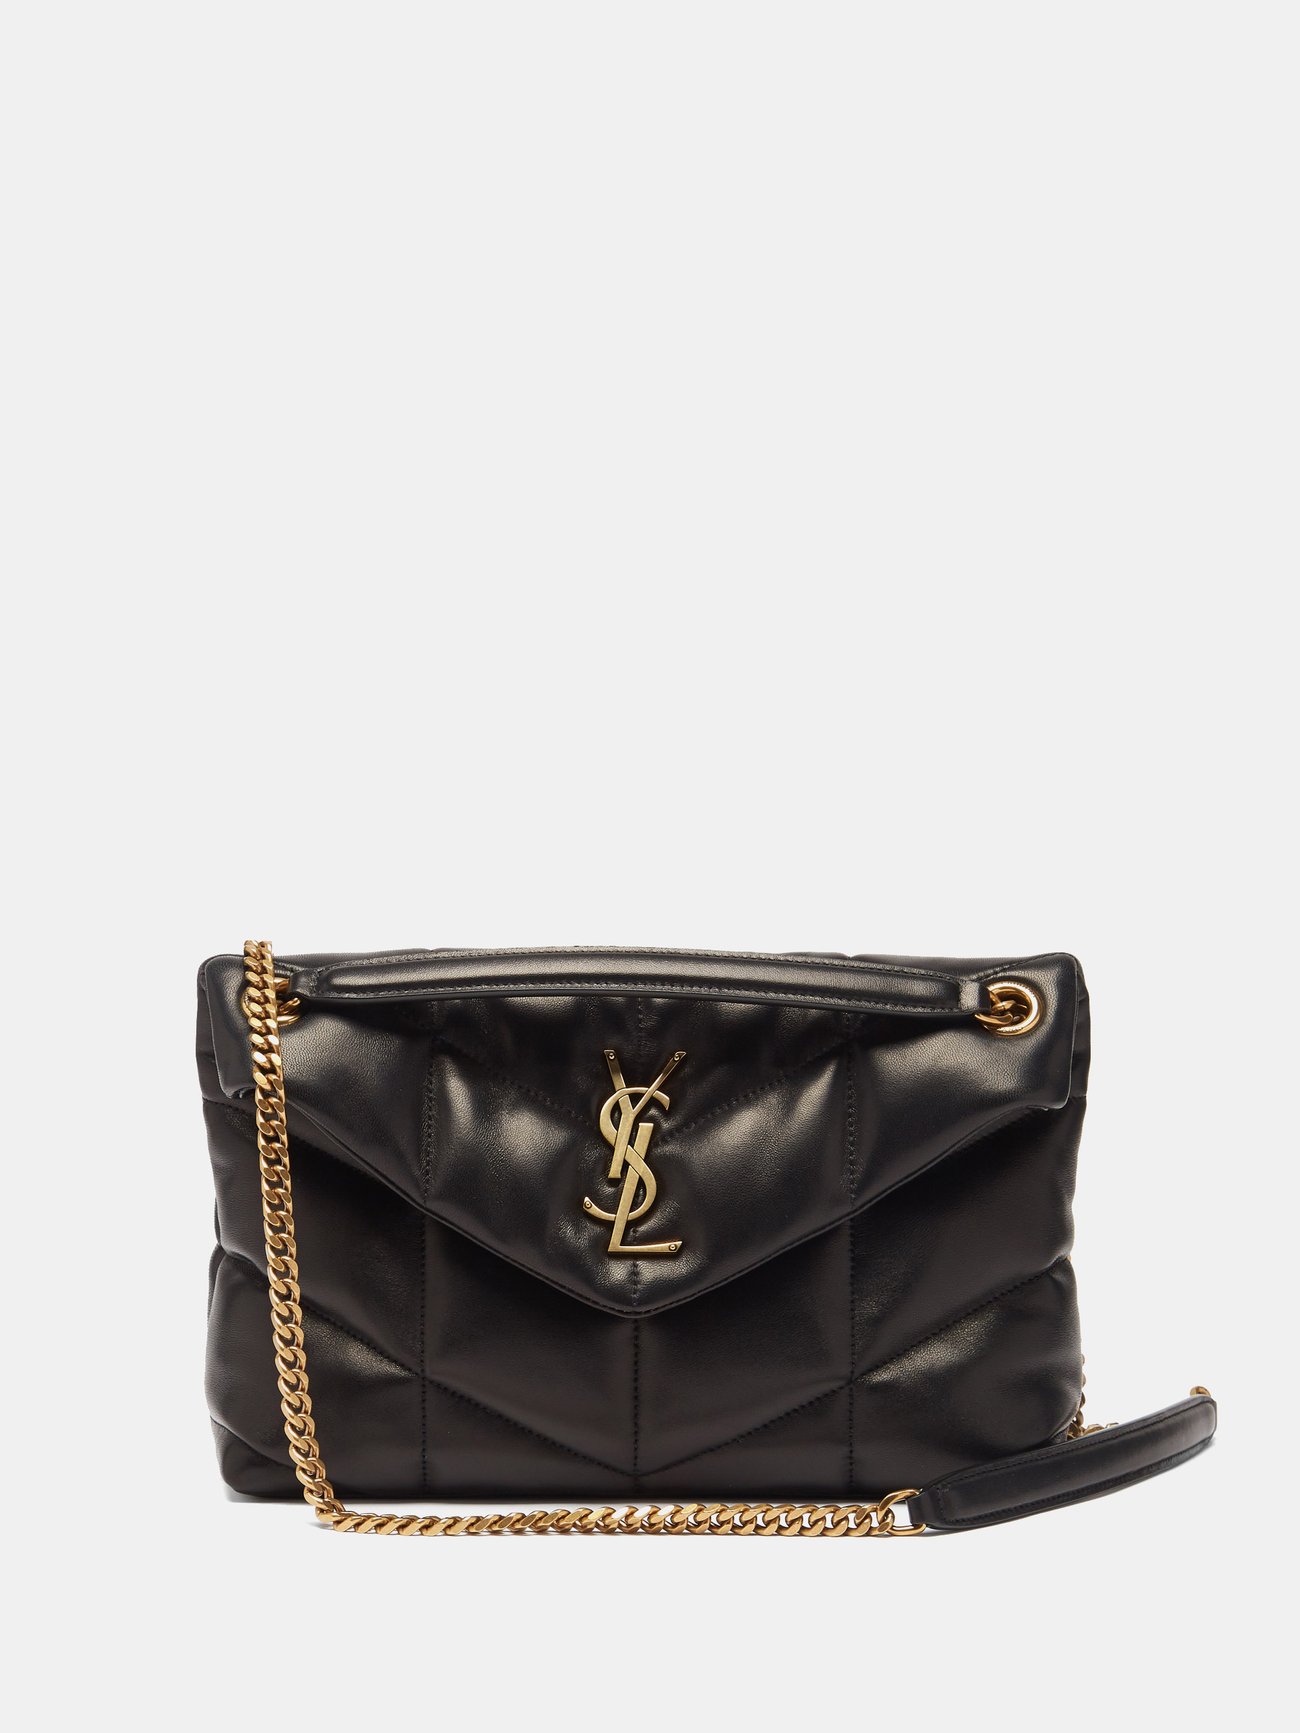 Saint Laurent Loulou Toy Ysl Puffer Quilted Lambskin Crossbody Bag Black